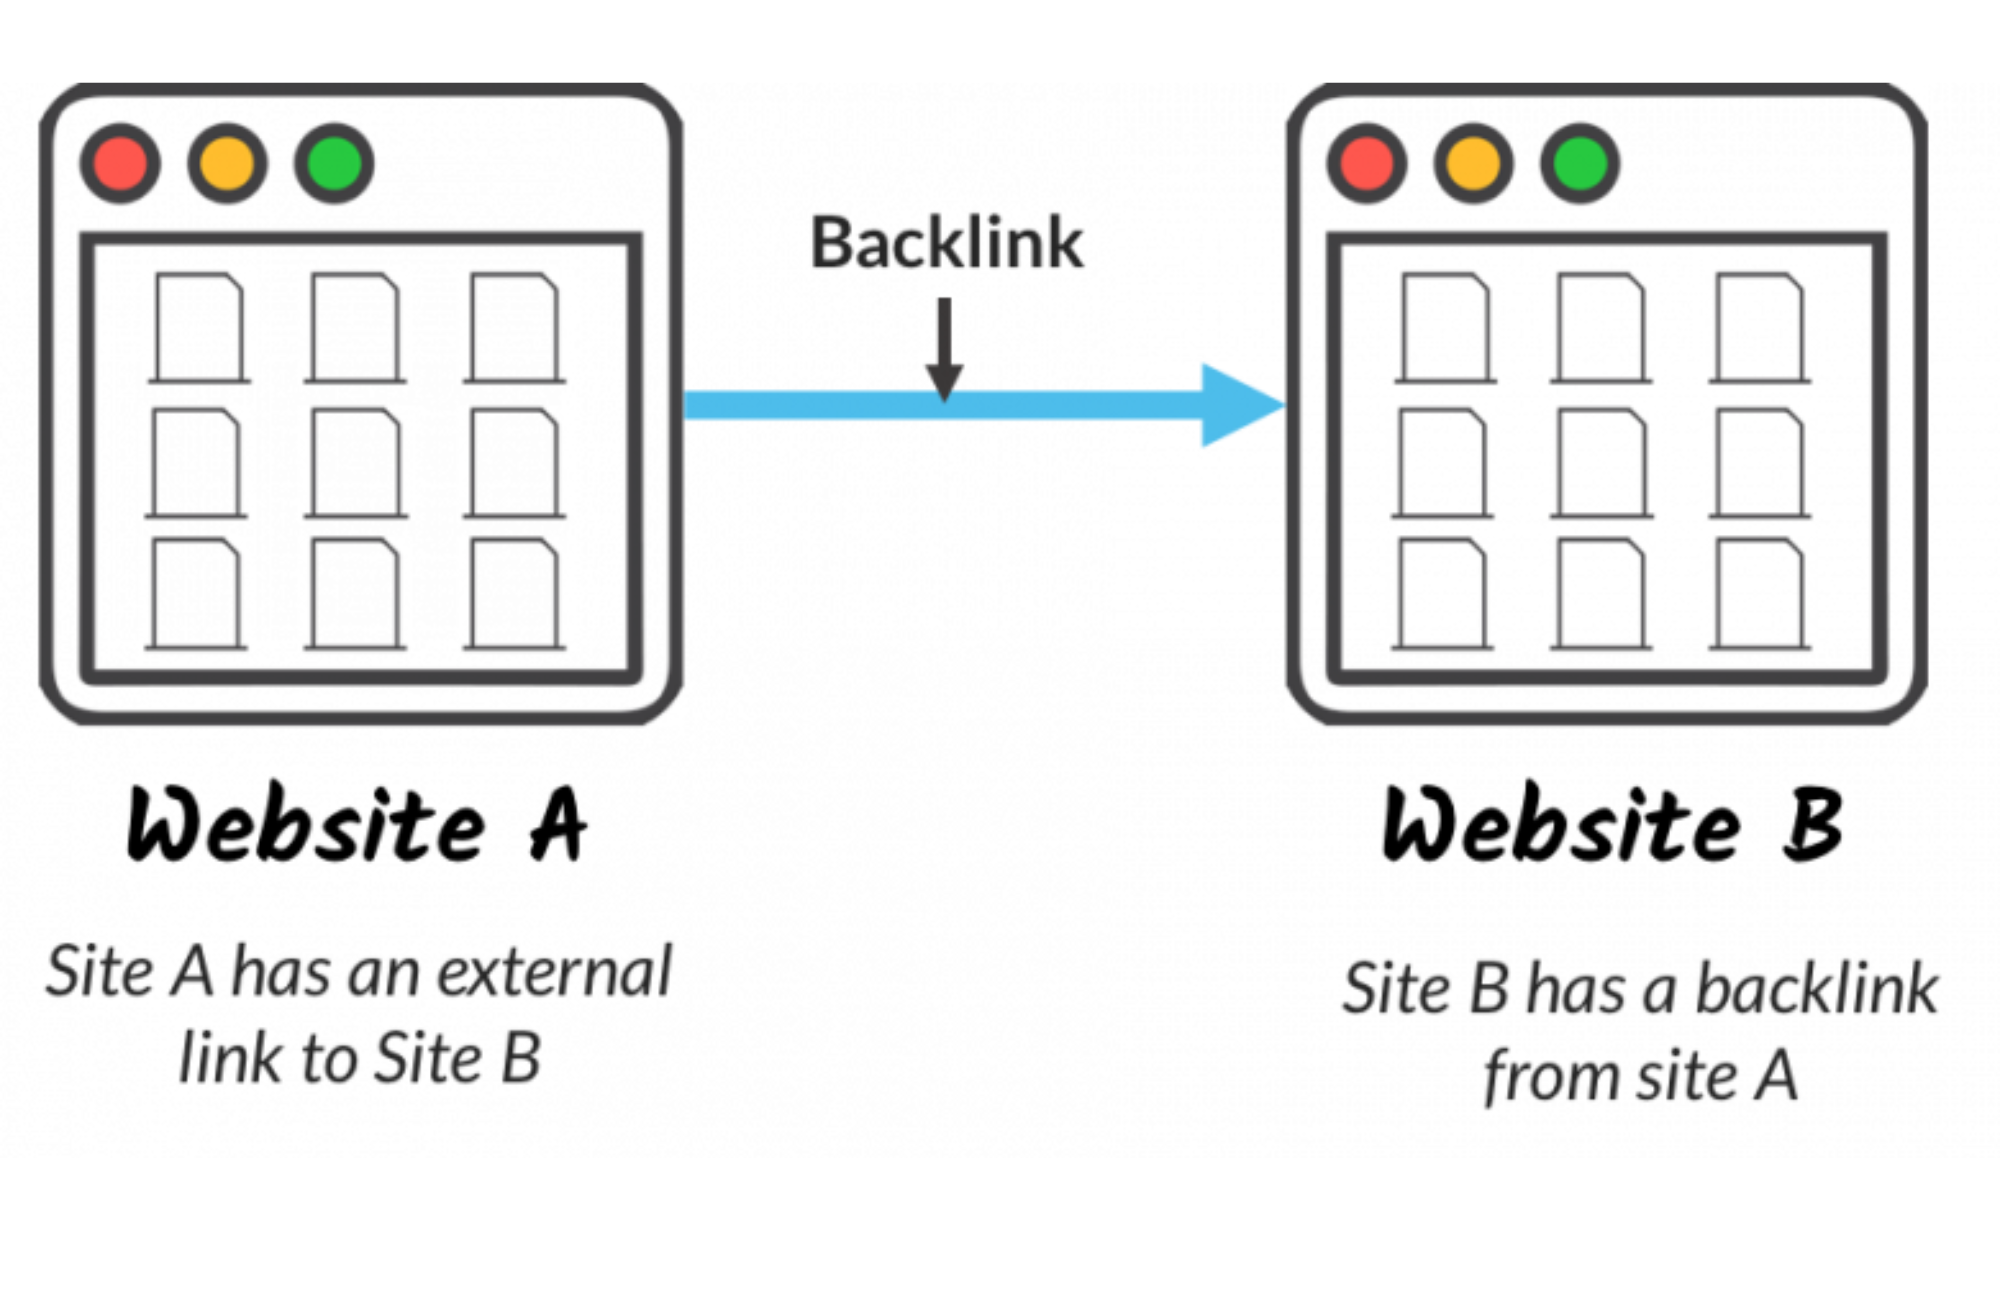 An illustration of how backlinks work: Website A links to the content of Website B